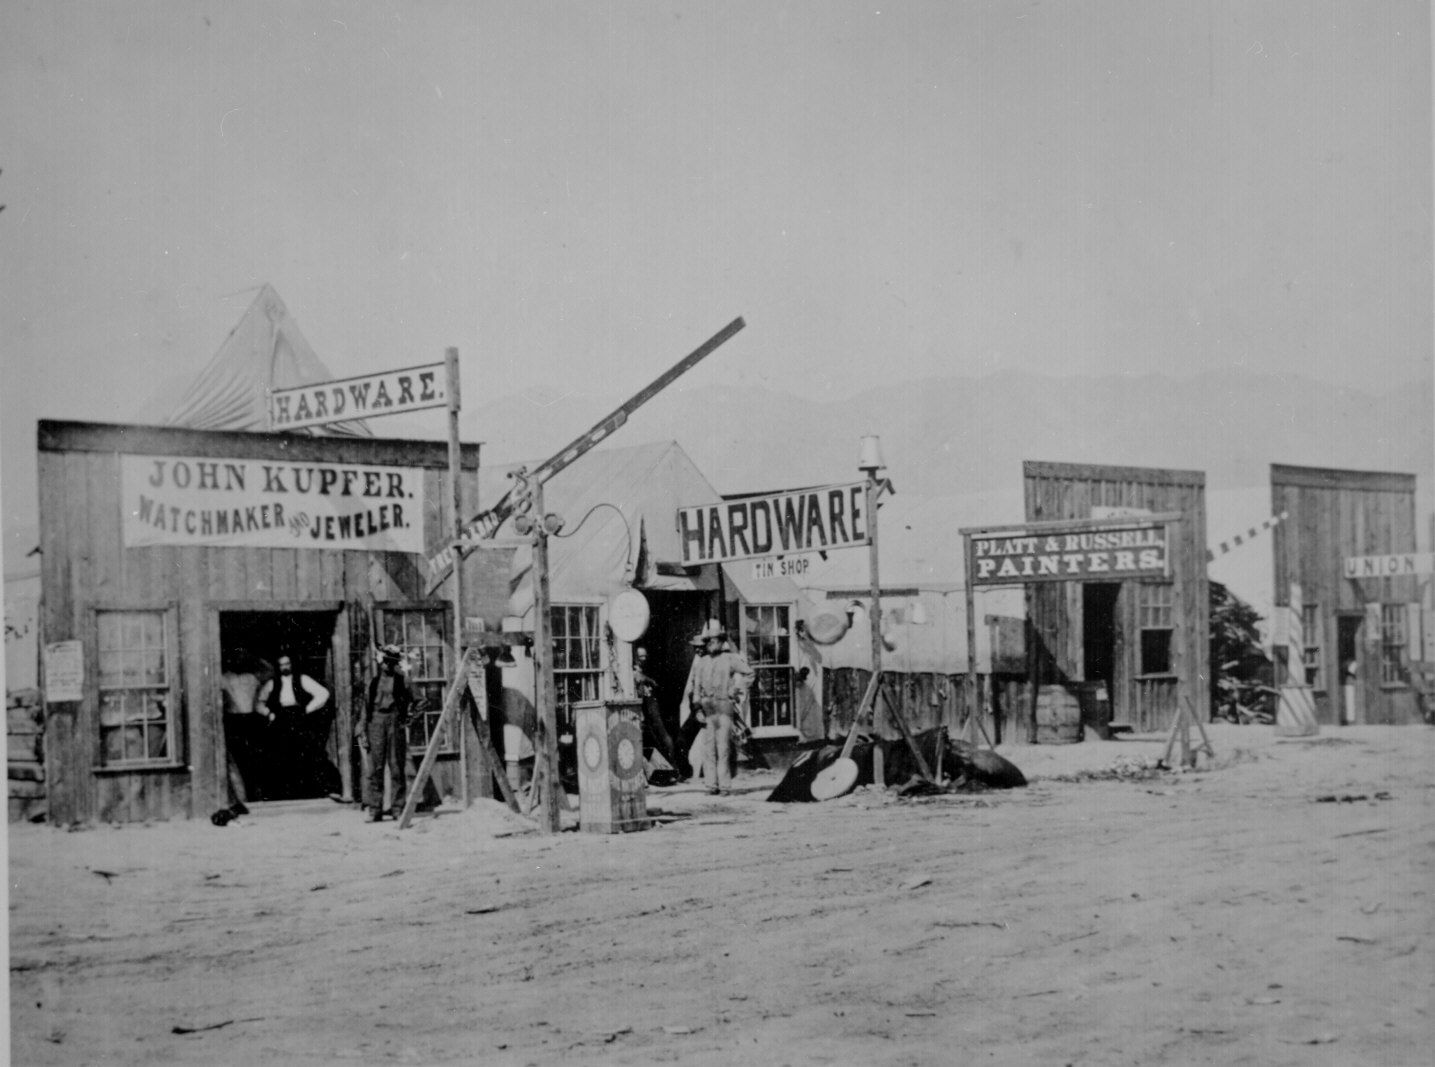 A Lawless Time Of Discover More Early Photos From The Old West image 1